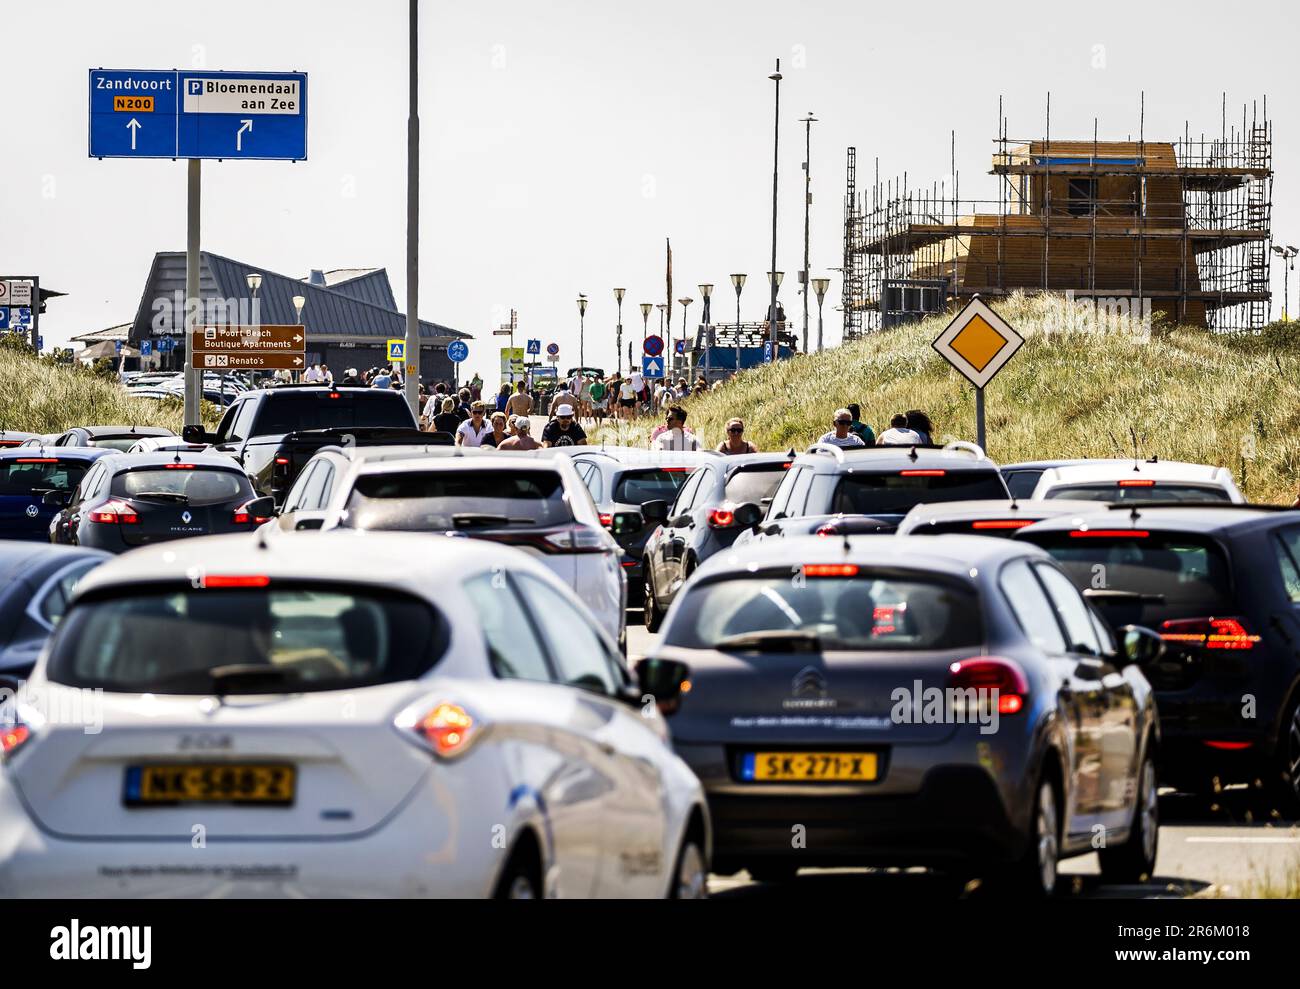 BLOEMENDAAL AAN ZEE - Crowds towards the beach of Bloemendaal aan Zee. There are high temperatures on the first tropical weekend of the year. ANP REMKO DE WAAL netherlands out - belgium out Credit: ANP/Alamy Live News Stock Photo